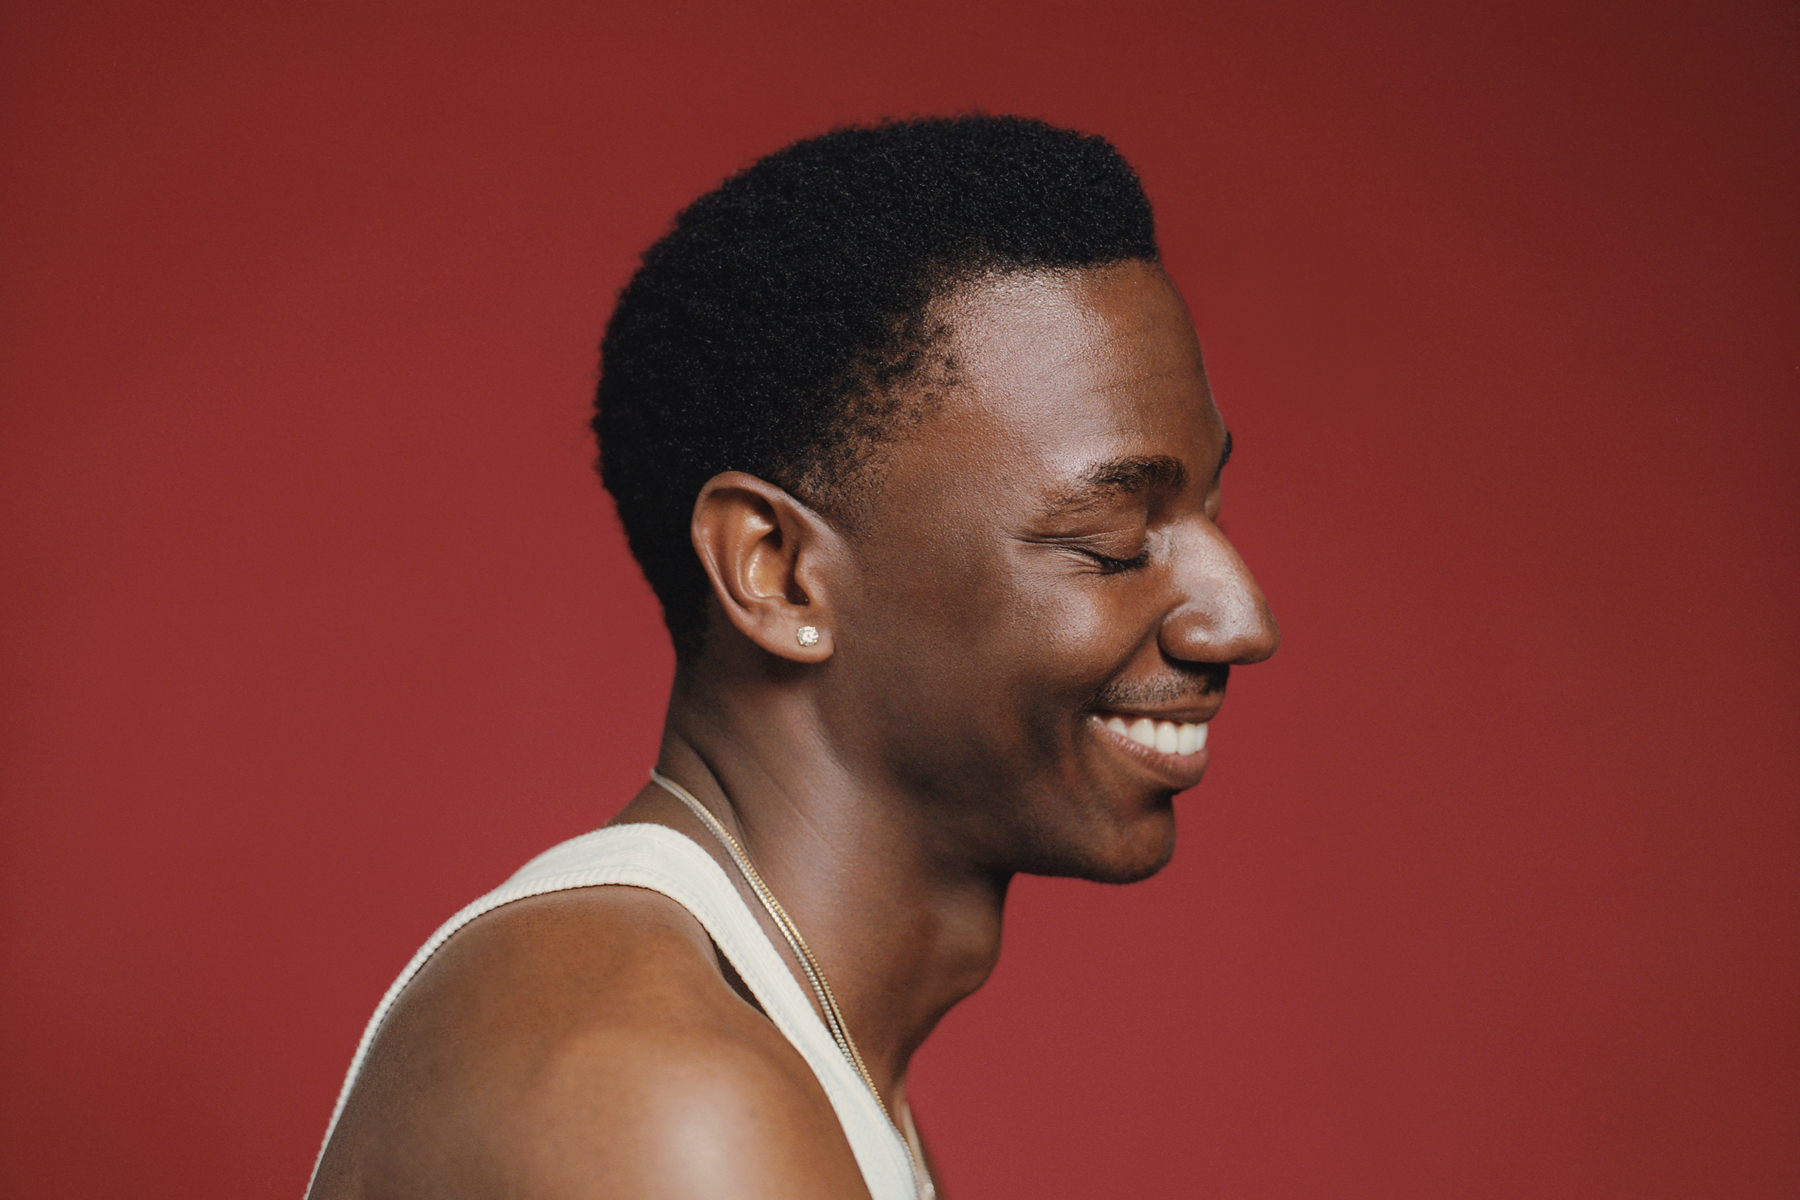 Jerrod Carmichael on ‘Rothaniel,’ Coming Out, and His Family